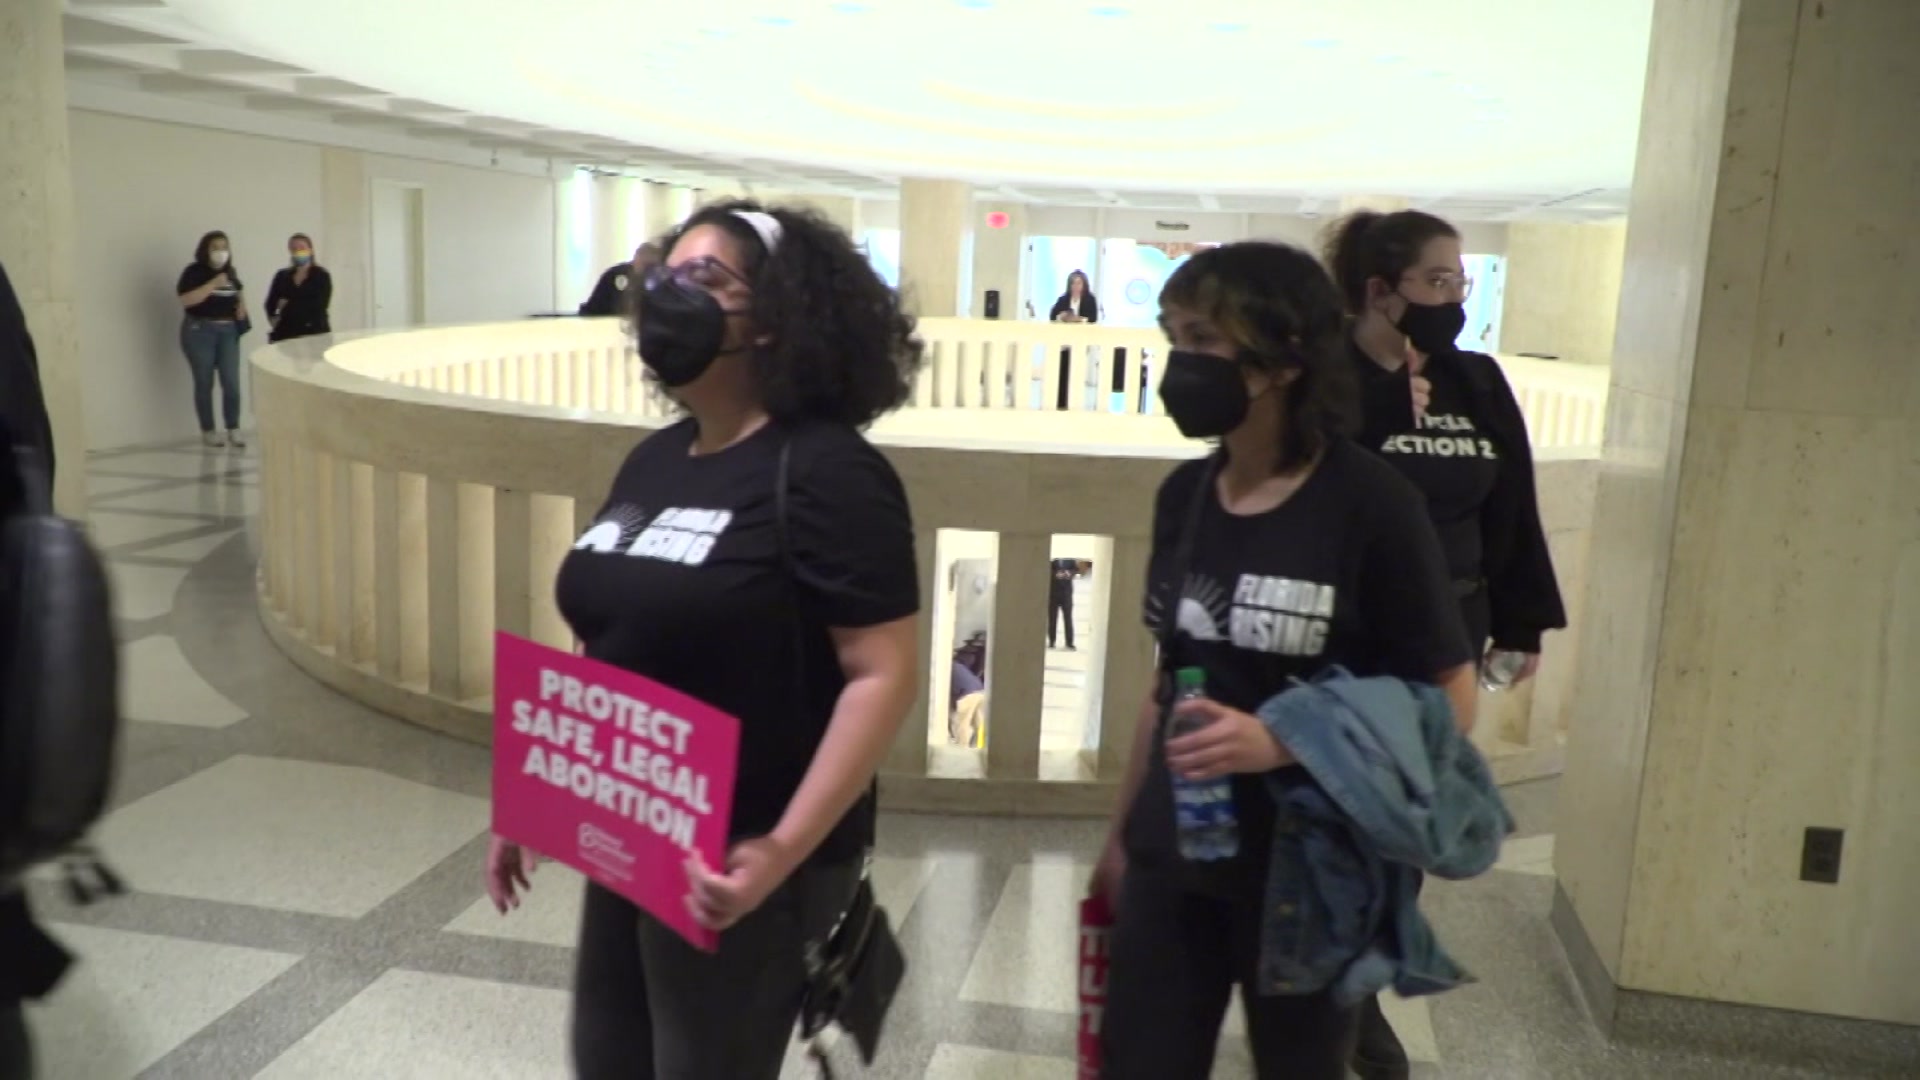 ‘Respect Their Rights To Bodily Autonomy’: Activists Present At Florida 15-Week Abortion Ban Hearing